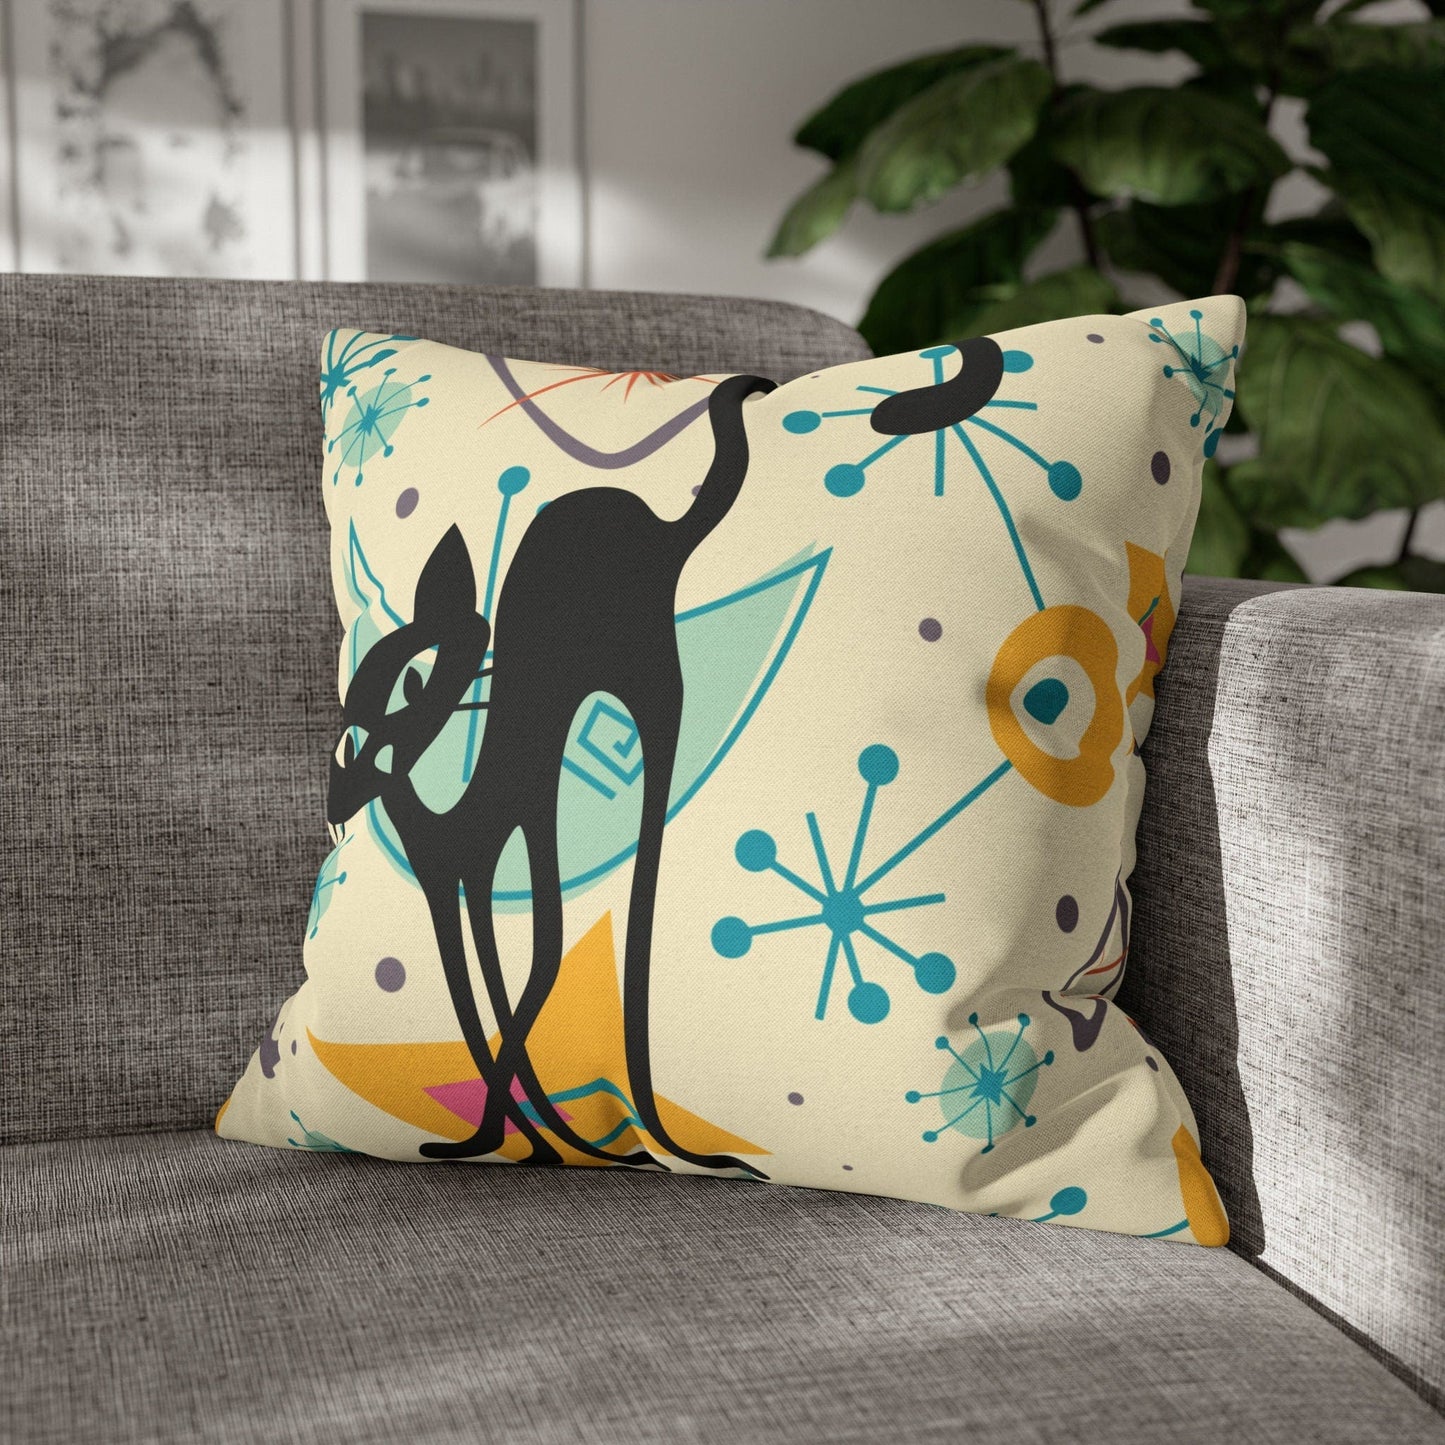 Kate McEnroe New York Retro Kitschy Cat Mid Mod Boomerang Starbursts Pillow Cover, Atomic MCM Cushion Covers, Mid Century Modern Living Room, Bedroom Decor Throw Pillow Covers